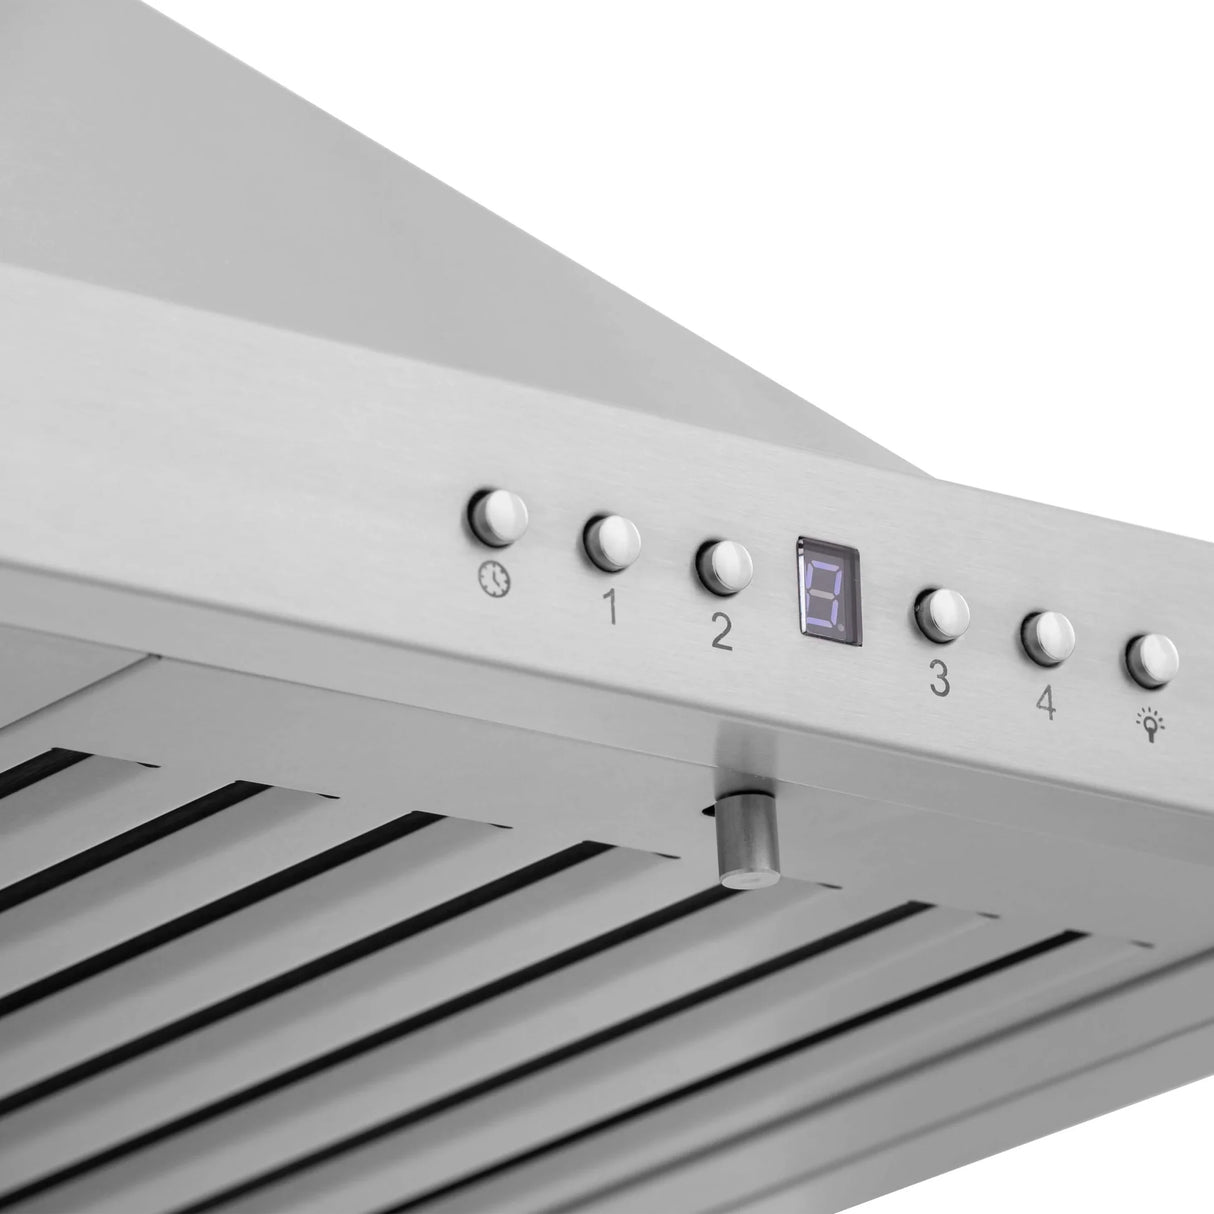 ZLINE 36" Convertible Vent Wall Mount Range Hood in Stainless Steel with Crown Molding